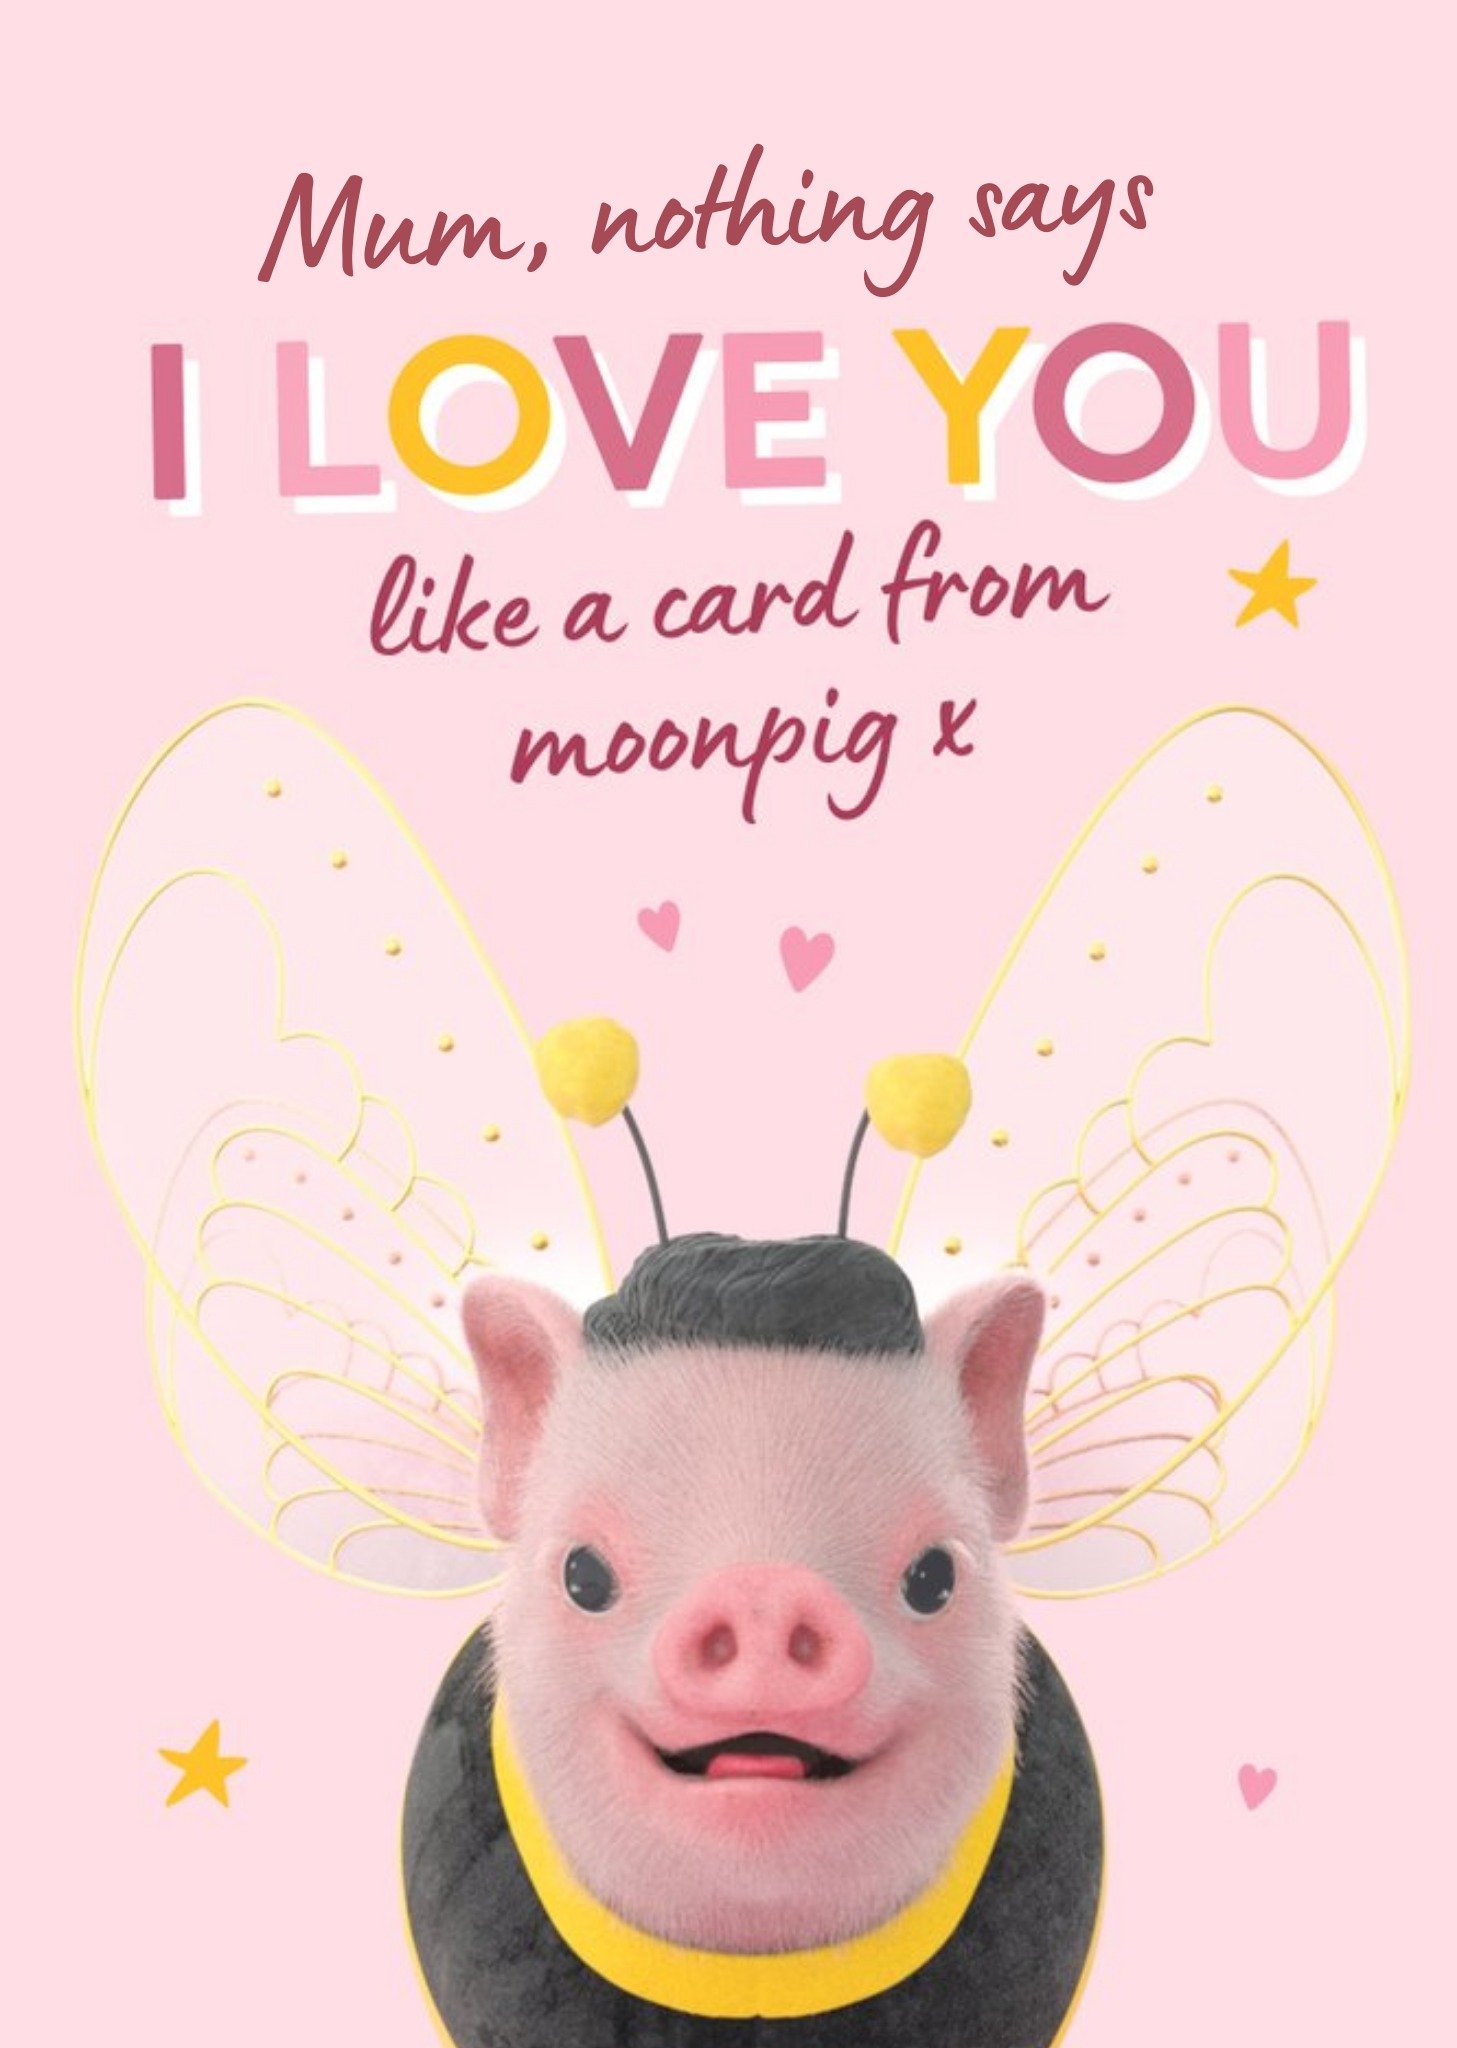 Moonpigs Cute Bumble Bee Pig Mother's Day Card Ecard